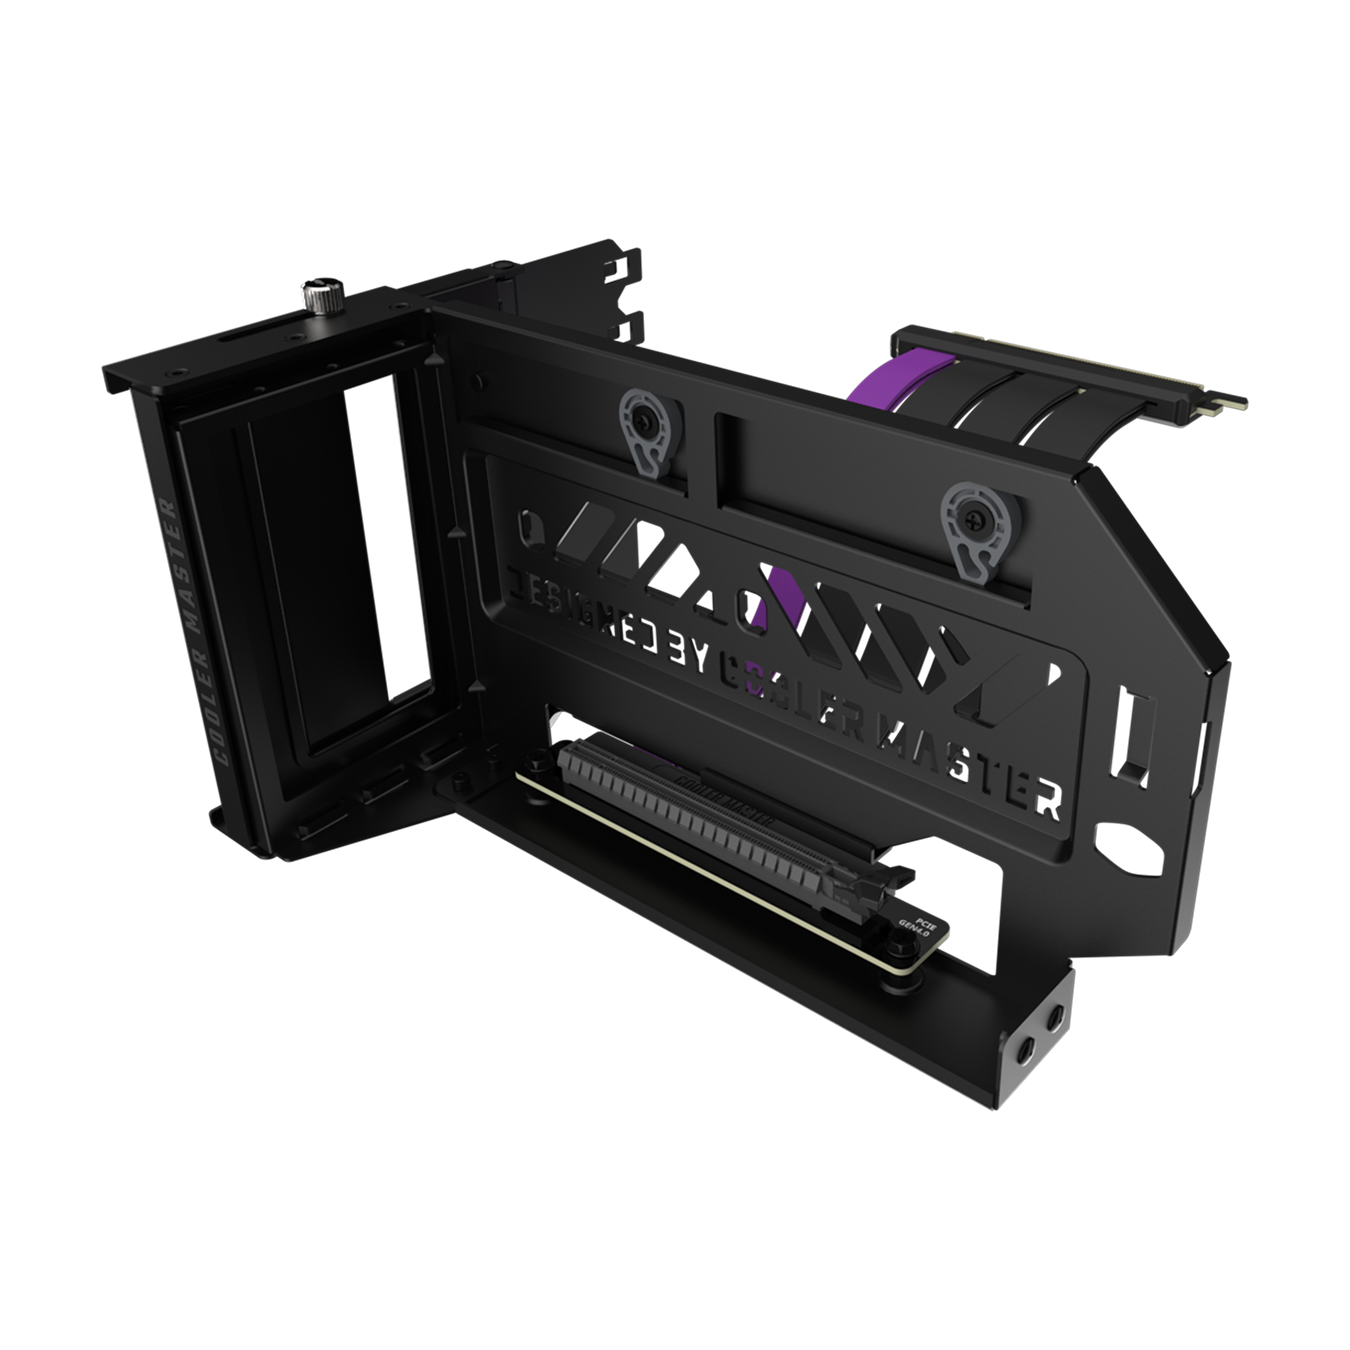 Vertical Graphics Card Holder Kit V3 - The GPU panel is completely removable for greater ease of installation and can be toollessly adjusted in two directions.